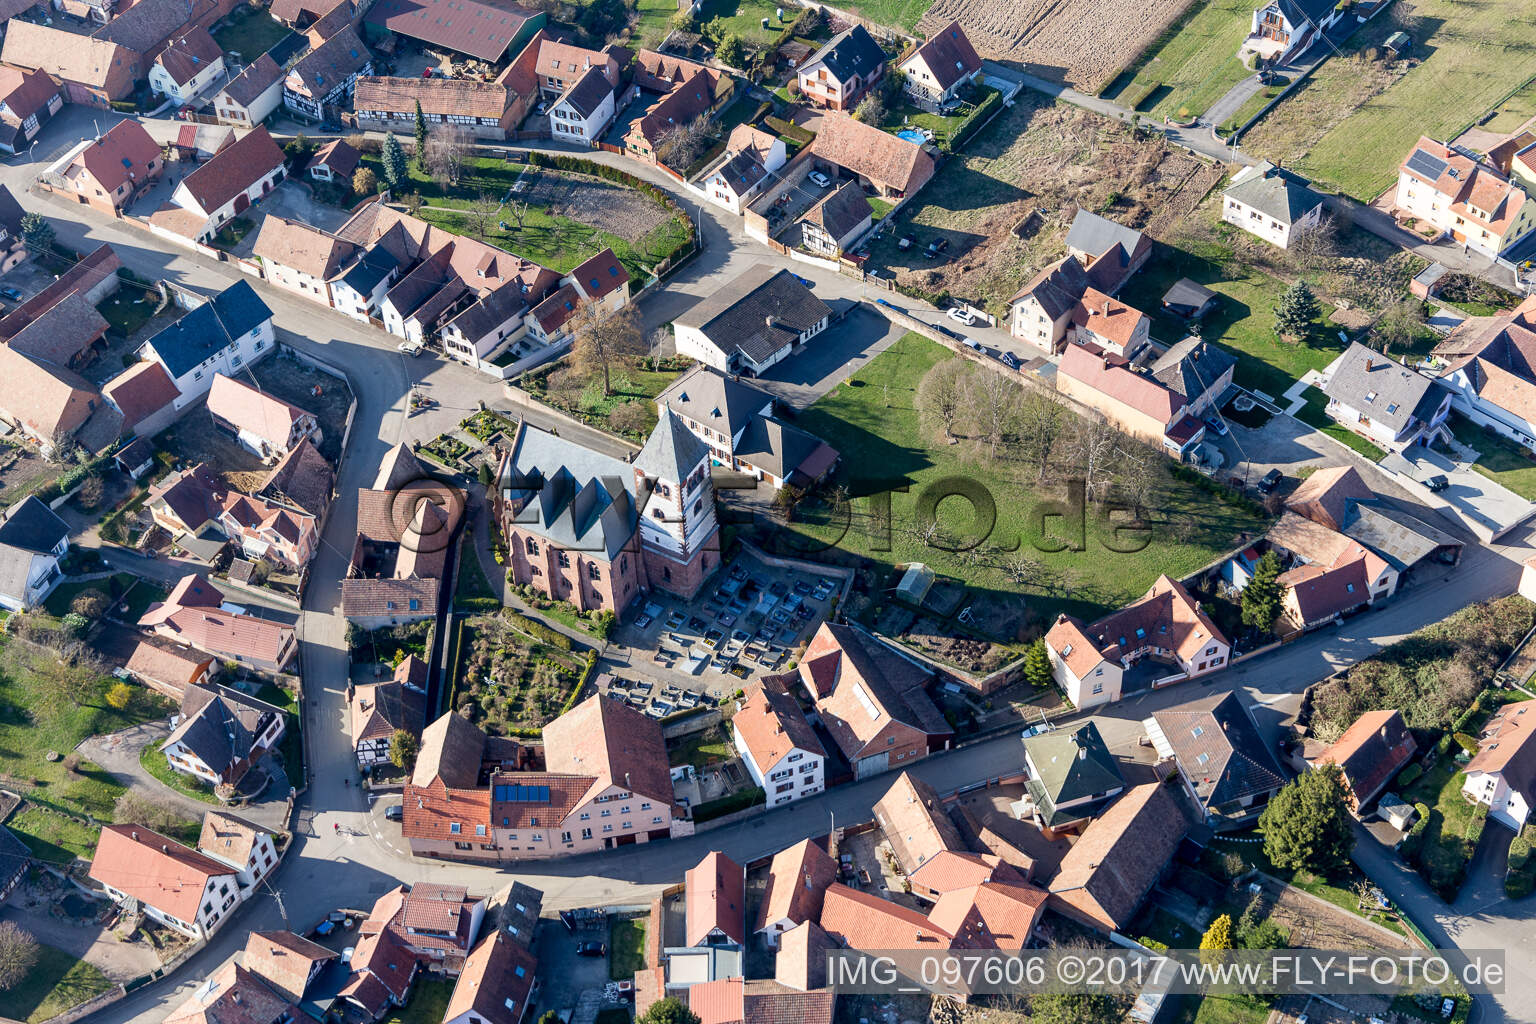 Schwindratzheim in the state Bas-Rhin, France seen from above